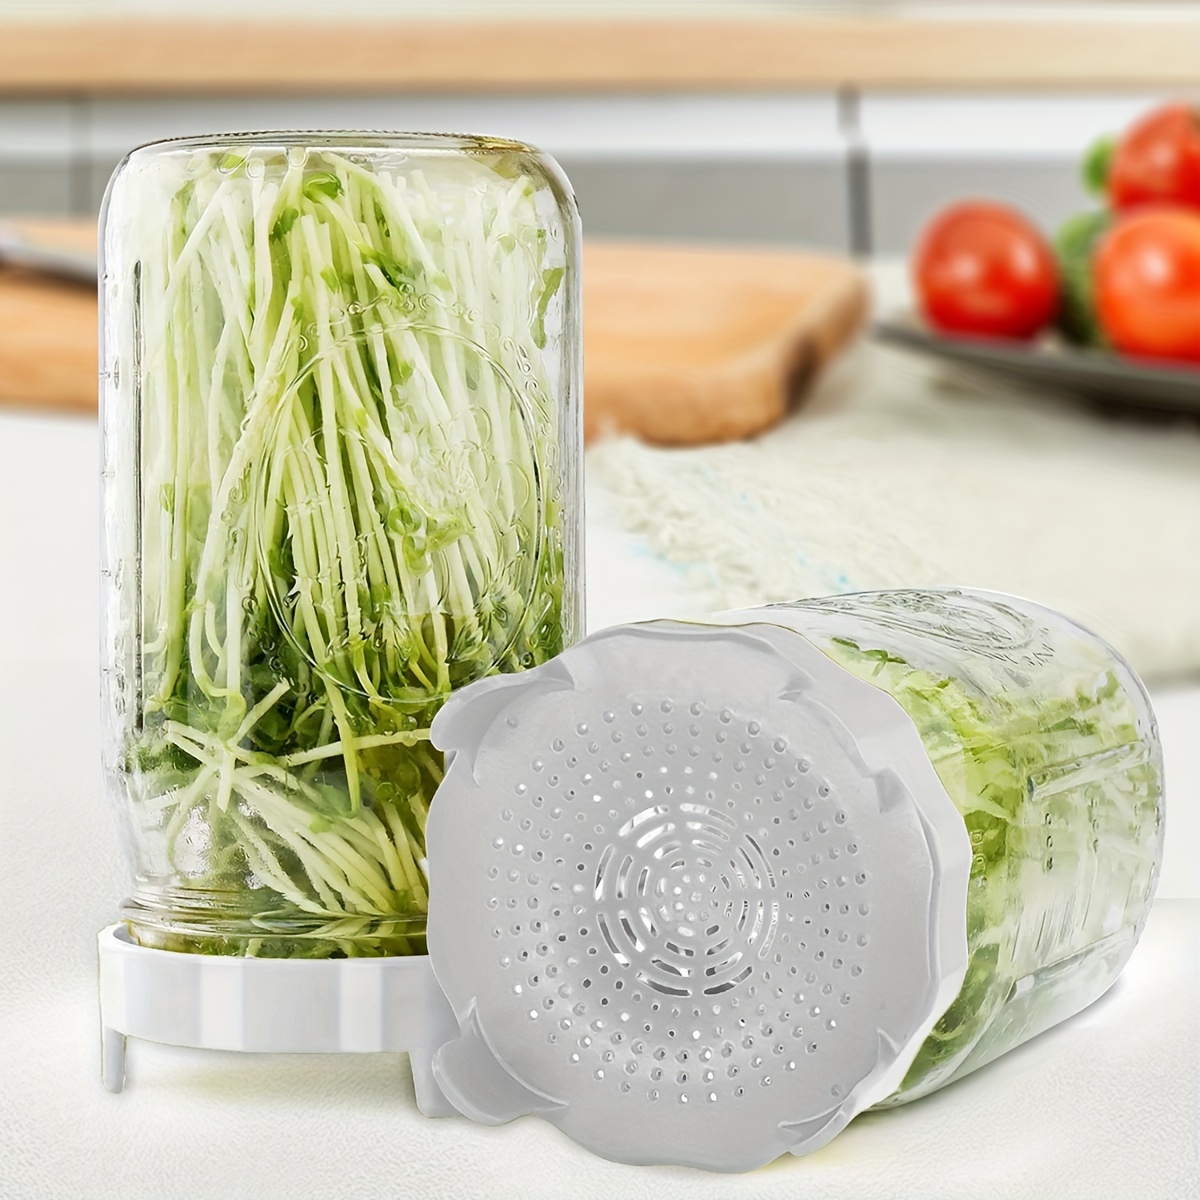 

1pc White Plastic Sprouting Lid For Mason Jars, 3.74inch Mesh Germination Cover For Seed Sprouting, Bpa-free Food-grade Material, Canning Jar Strainer Cap